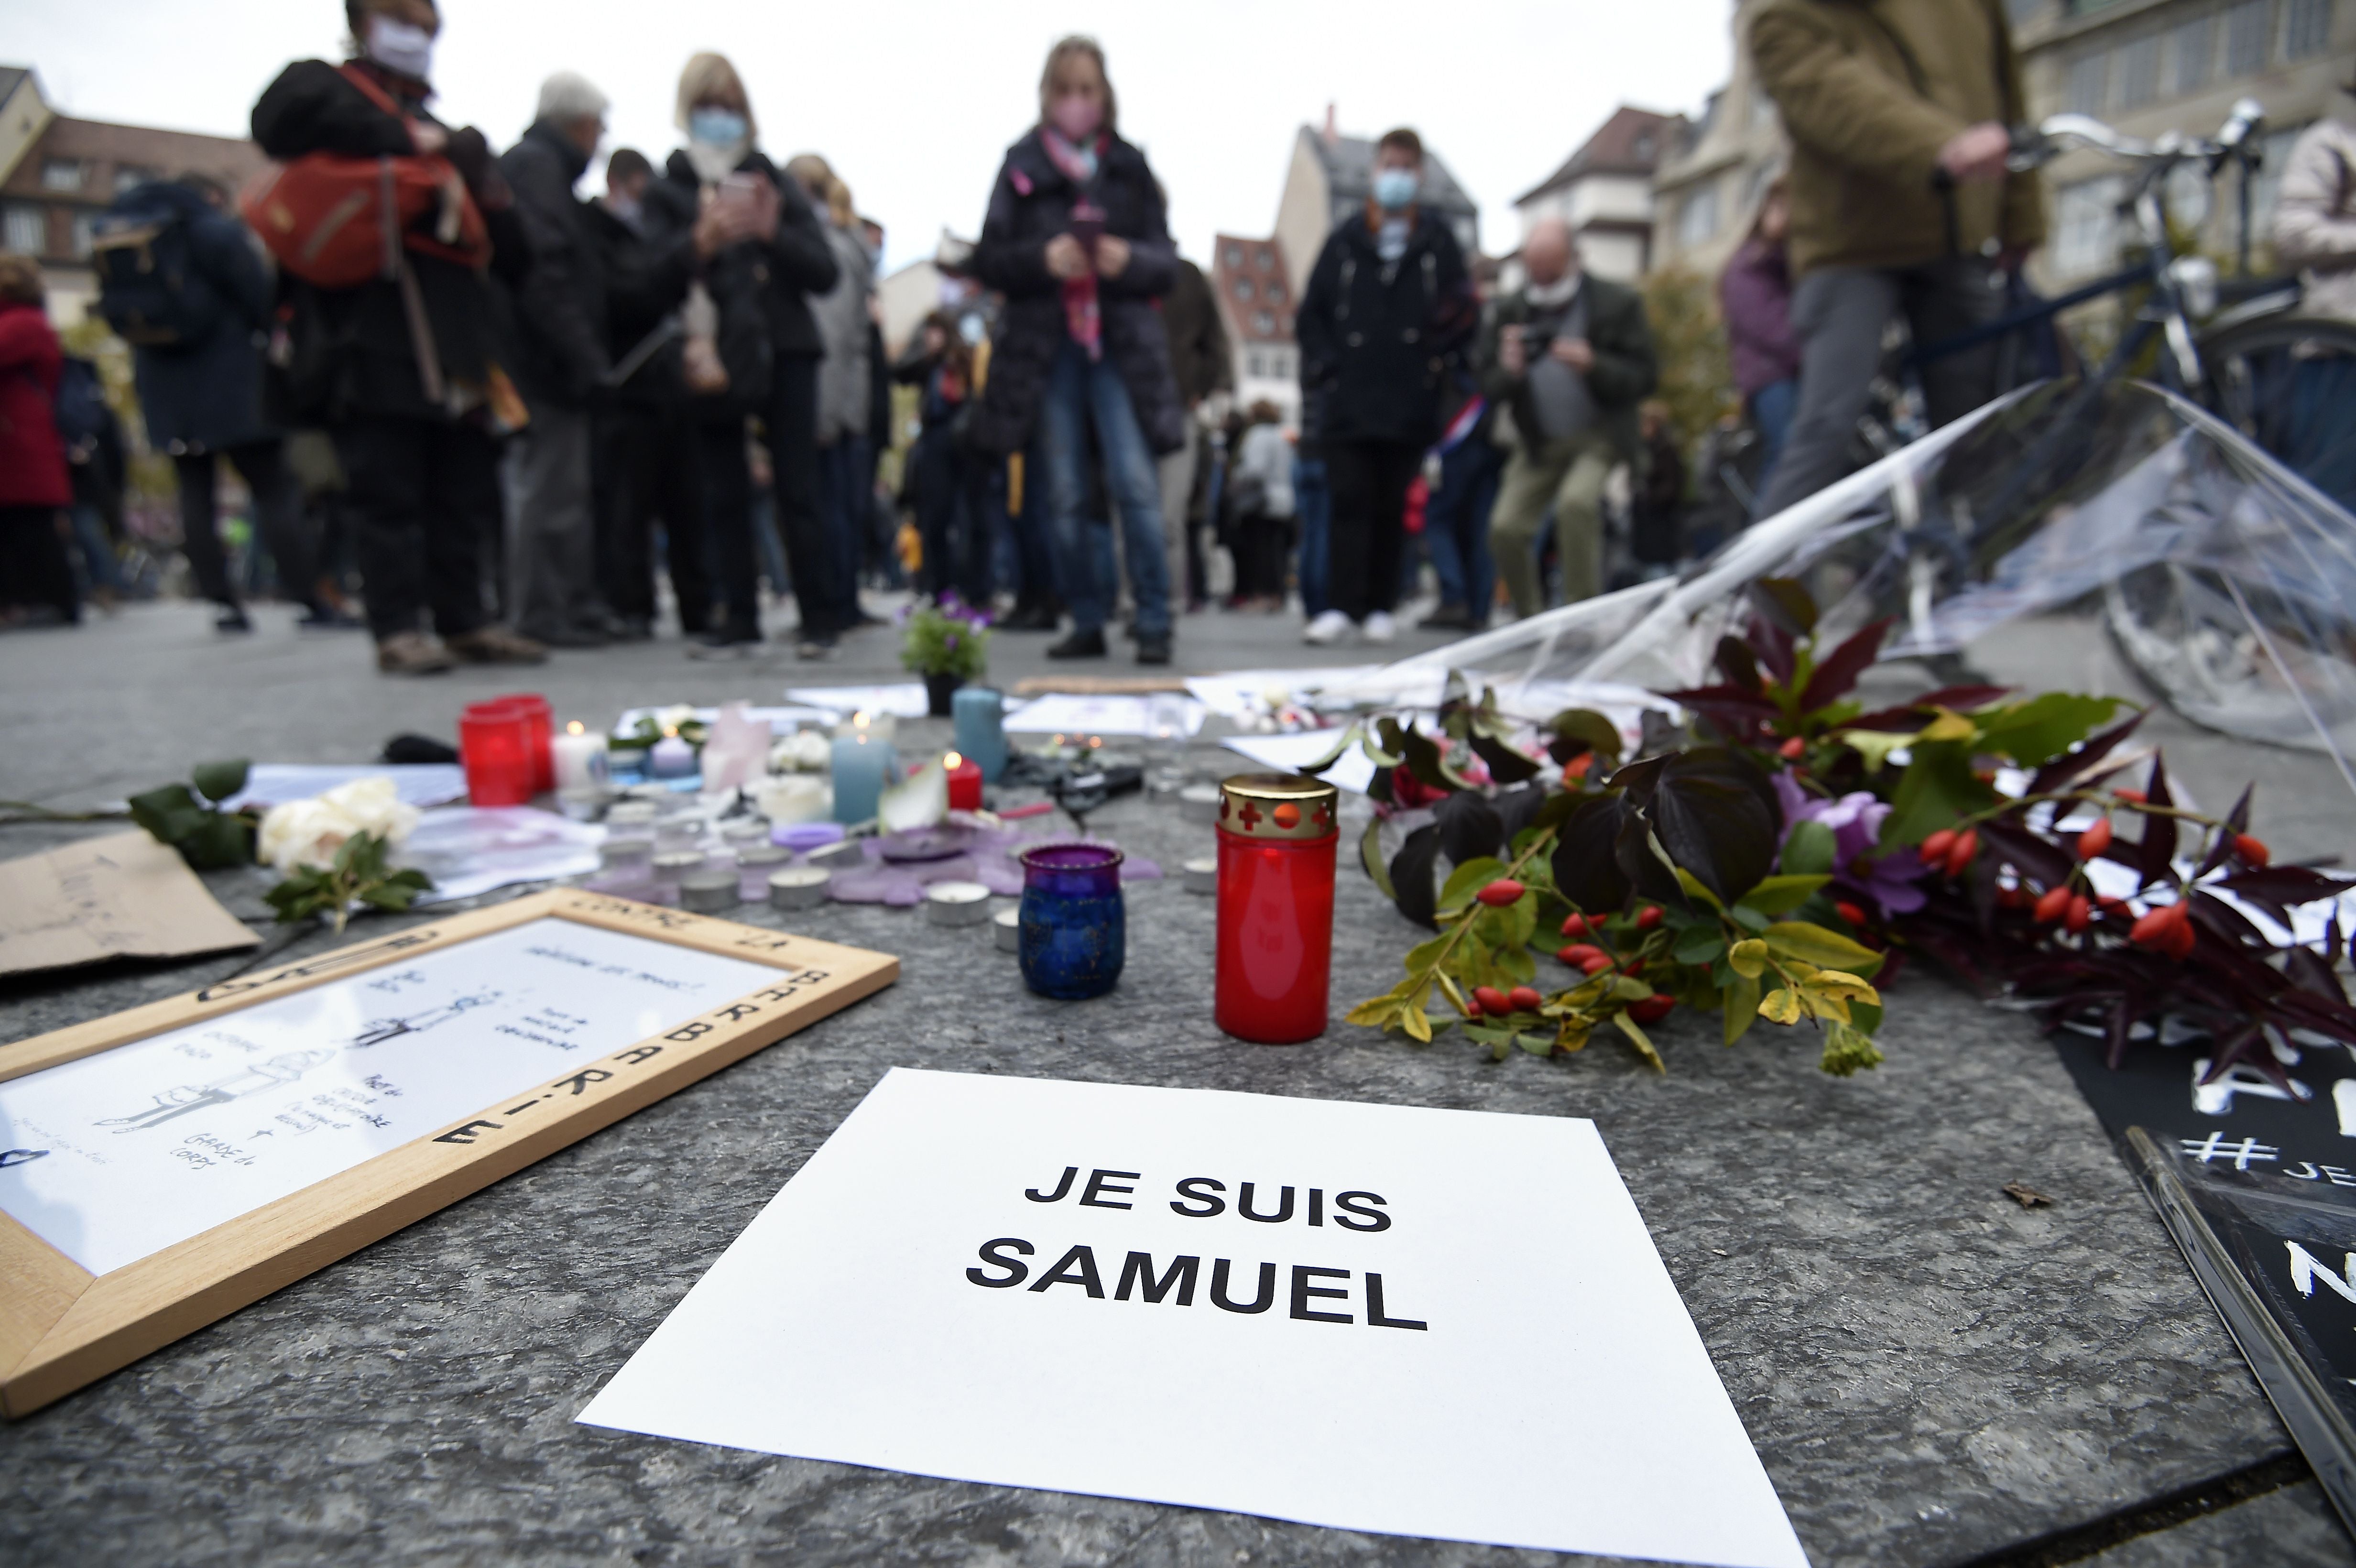 People gathered at the weekend to pay homage to Samuel Paty after he was beheaded outside his school